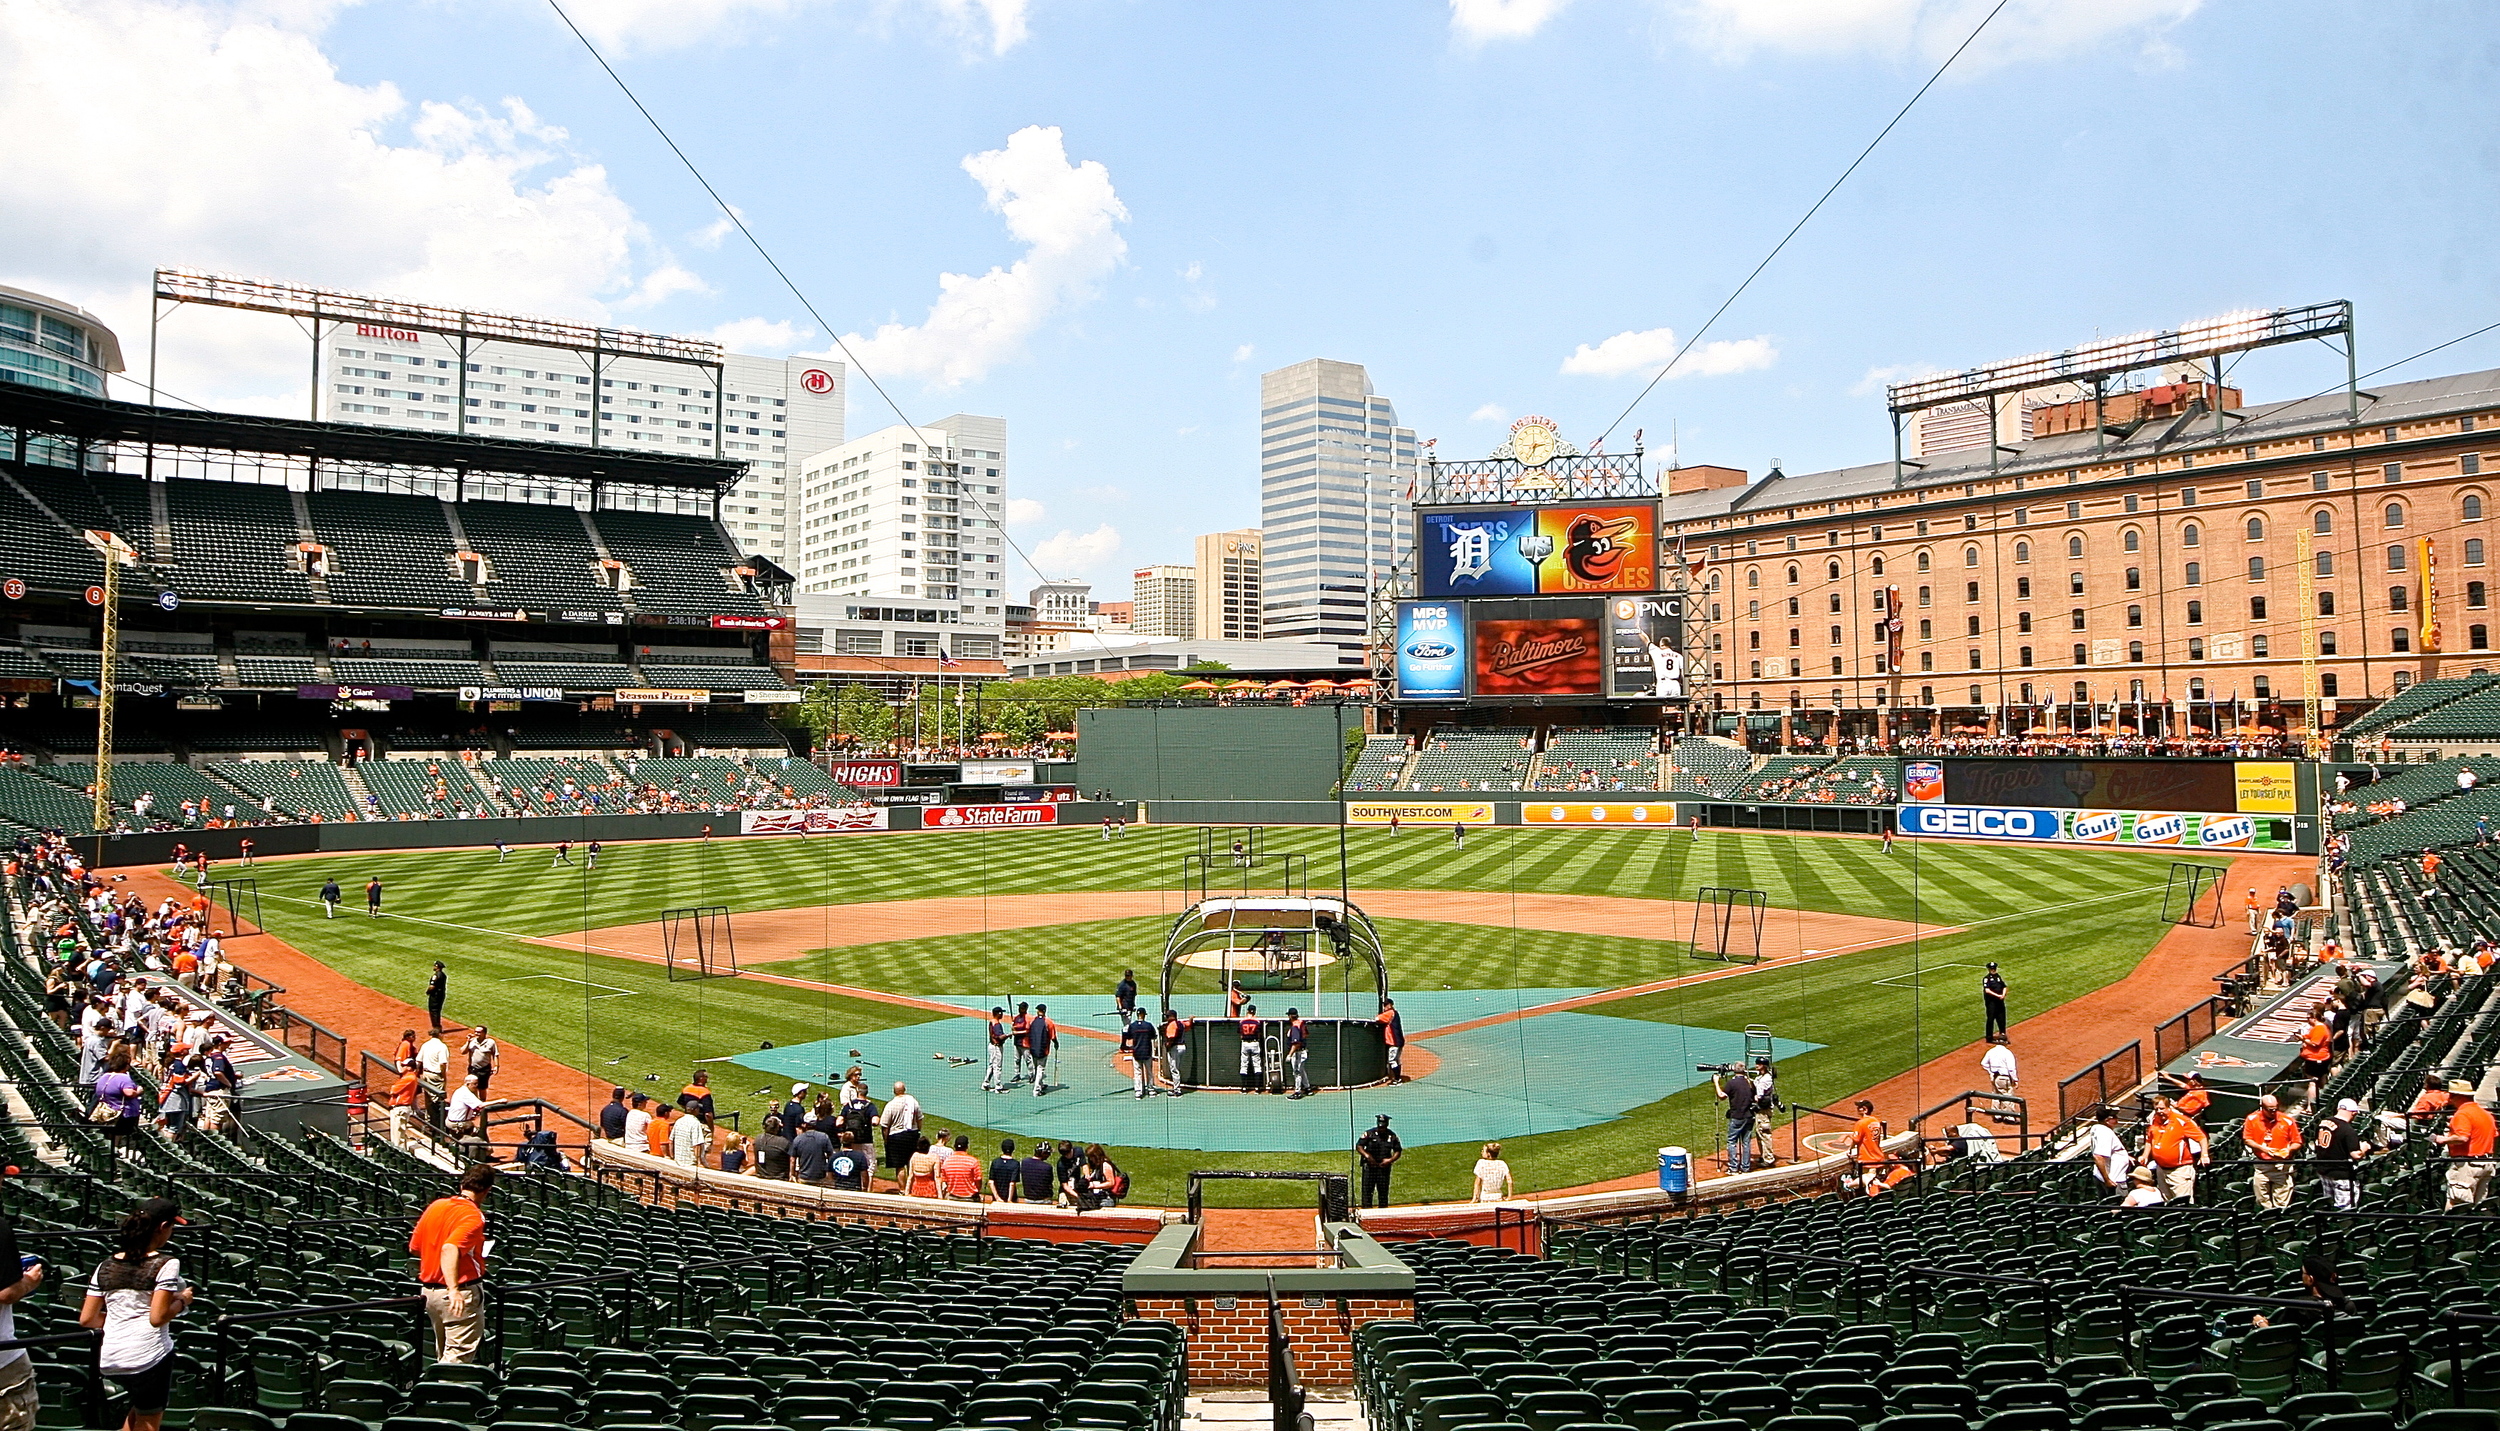 Day #4 - The Baltimore Orioles — Rounding Third